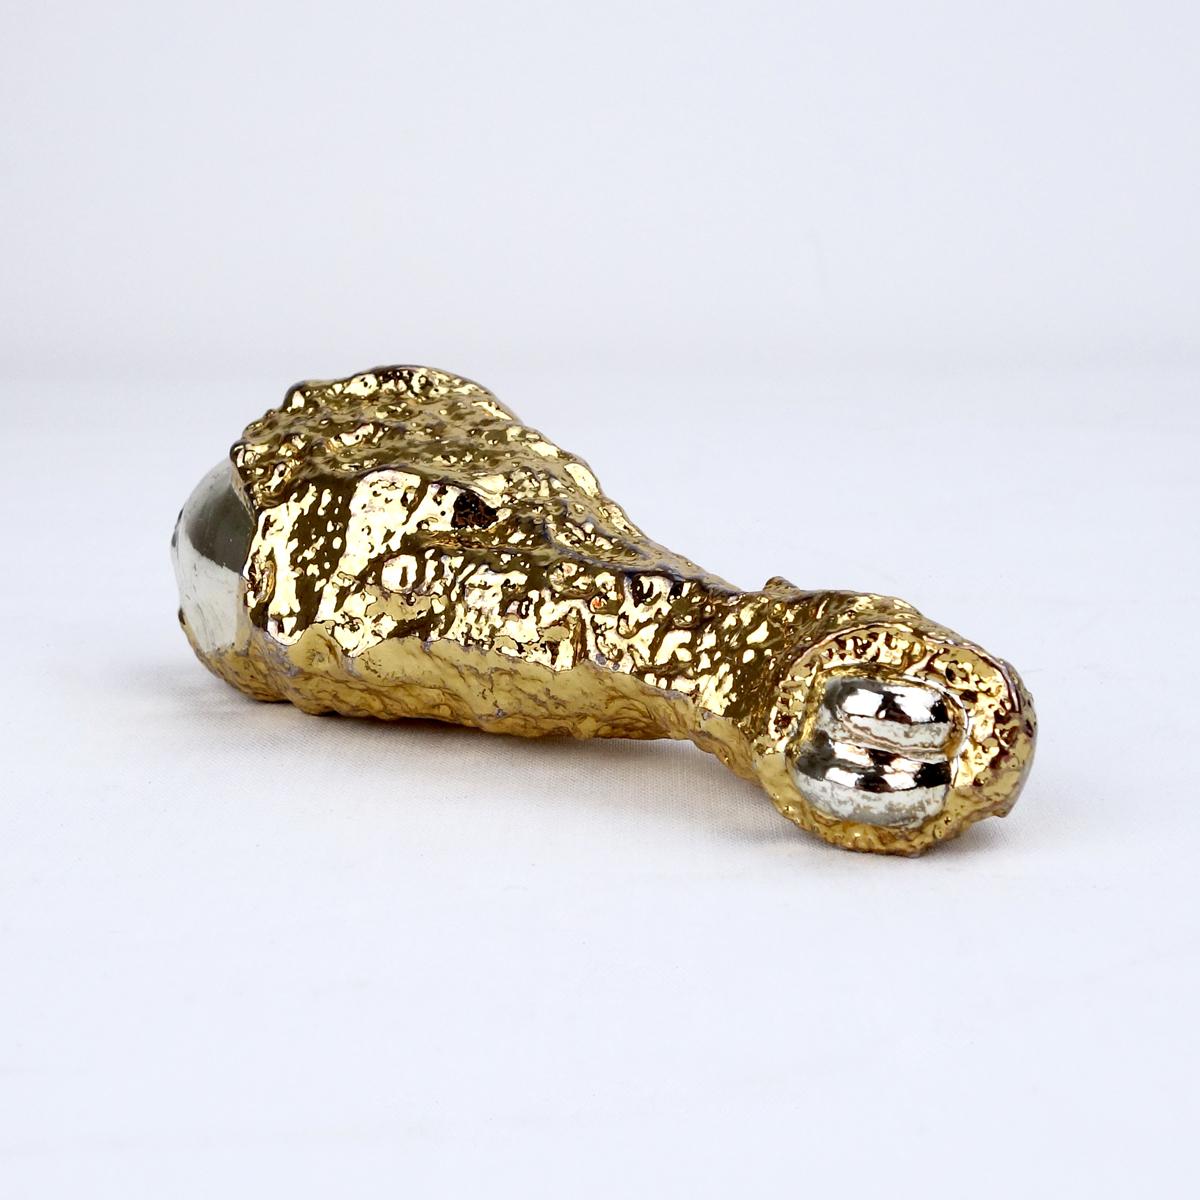 Ted Arnold high society solid fake gold cast fast food emporium says the original carton box. According to the same box the series contained this golden fried chicken leg, a golden fried egg, a hand cast ice cream cone, a gold burger, a mushroom